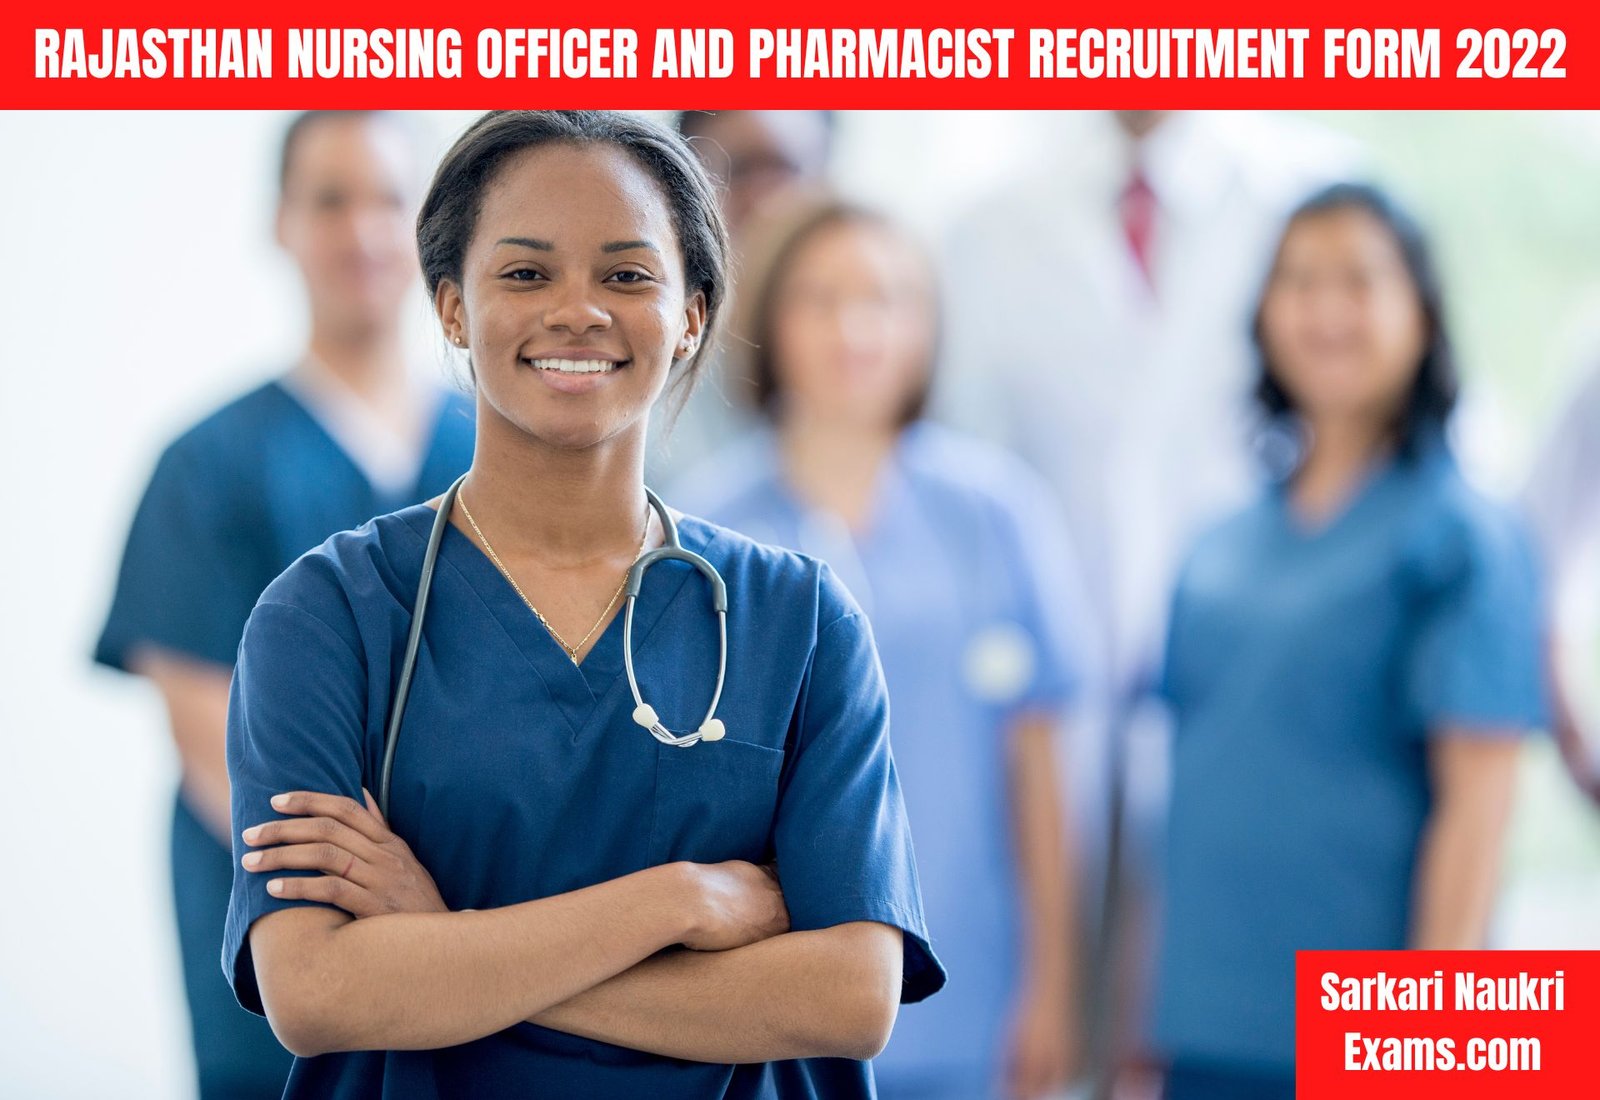 Rajasthan Nursing Officer and Pharmacist Recruitment Form 2022 | Last Date 23/12/2022